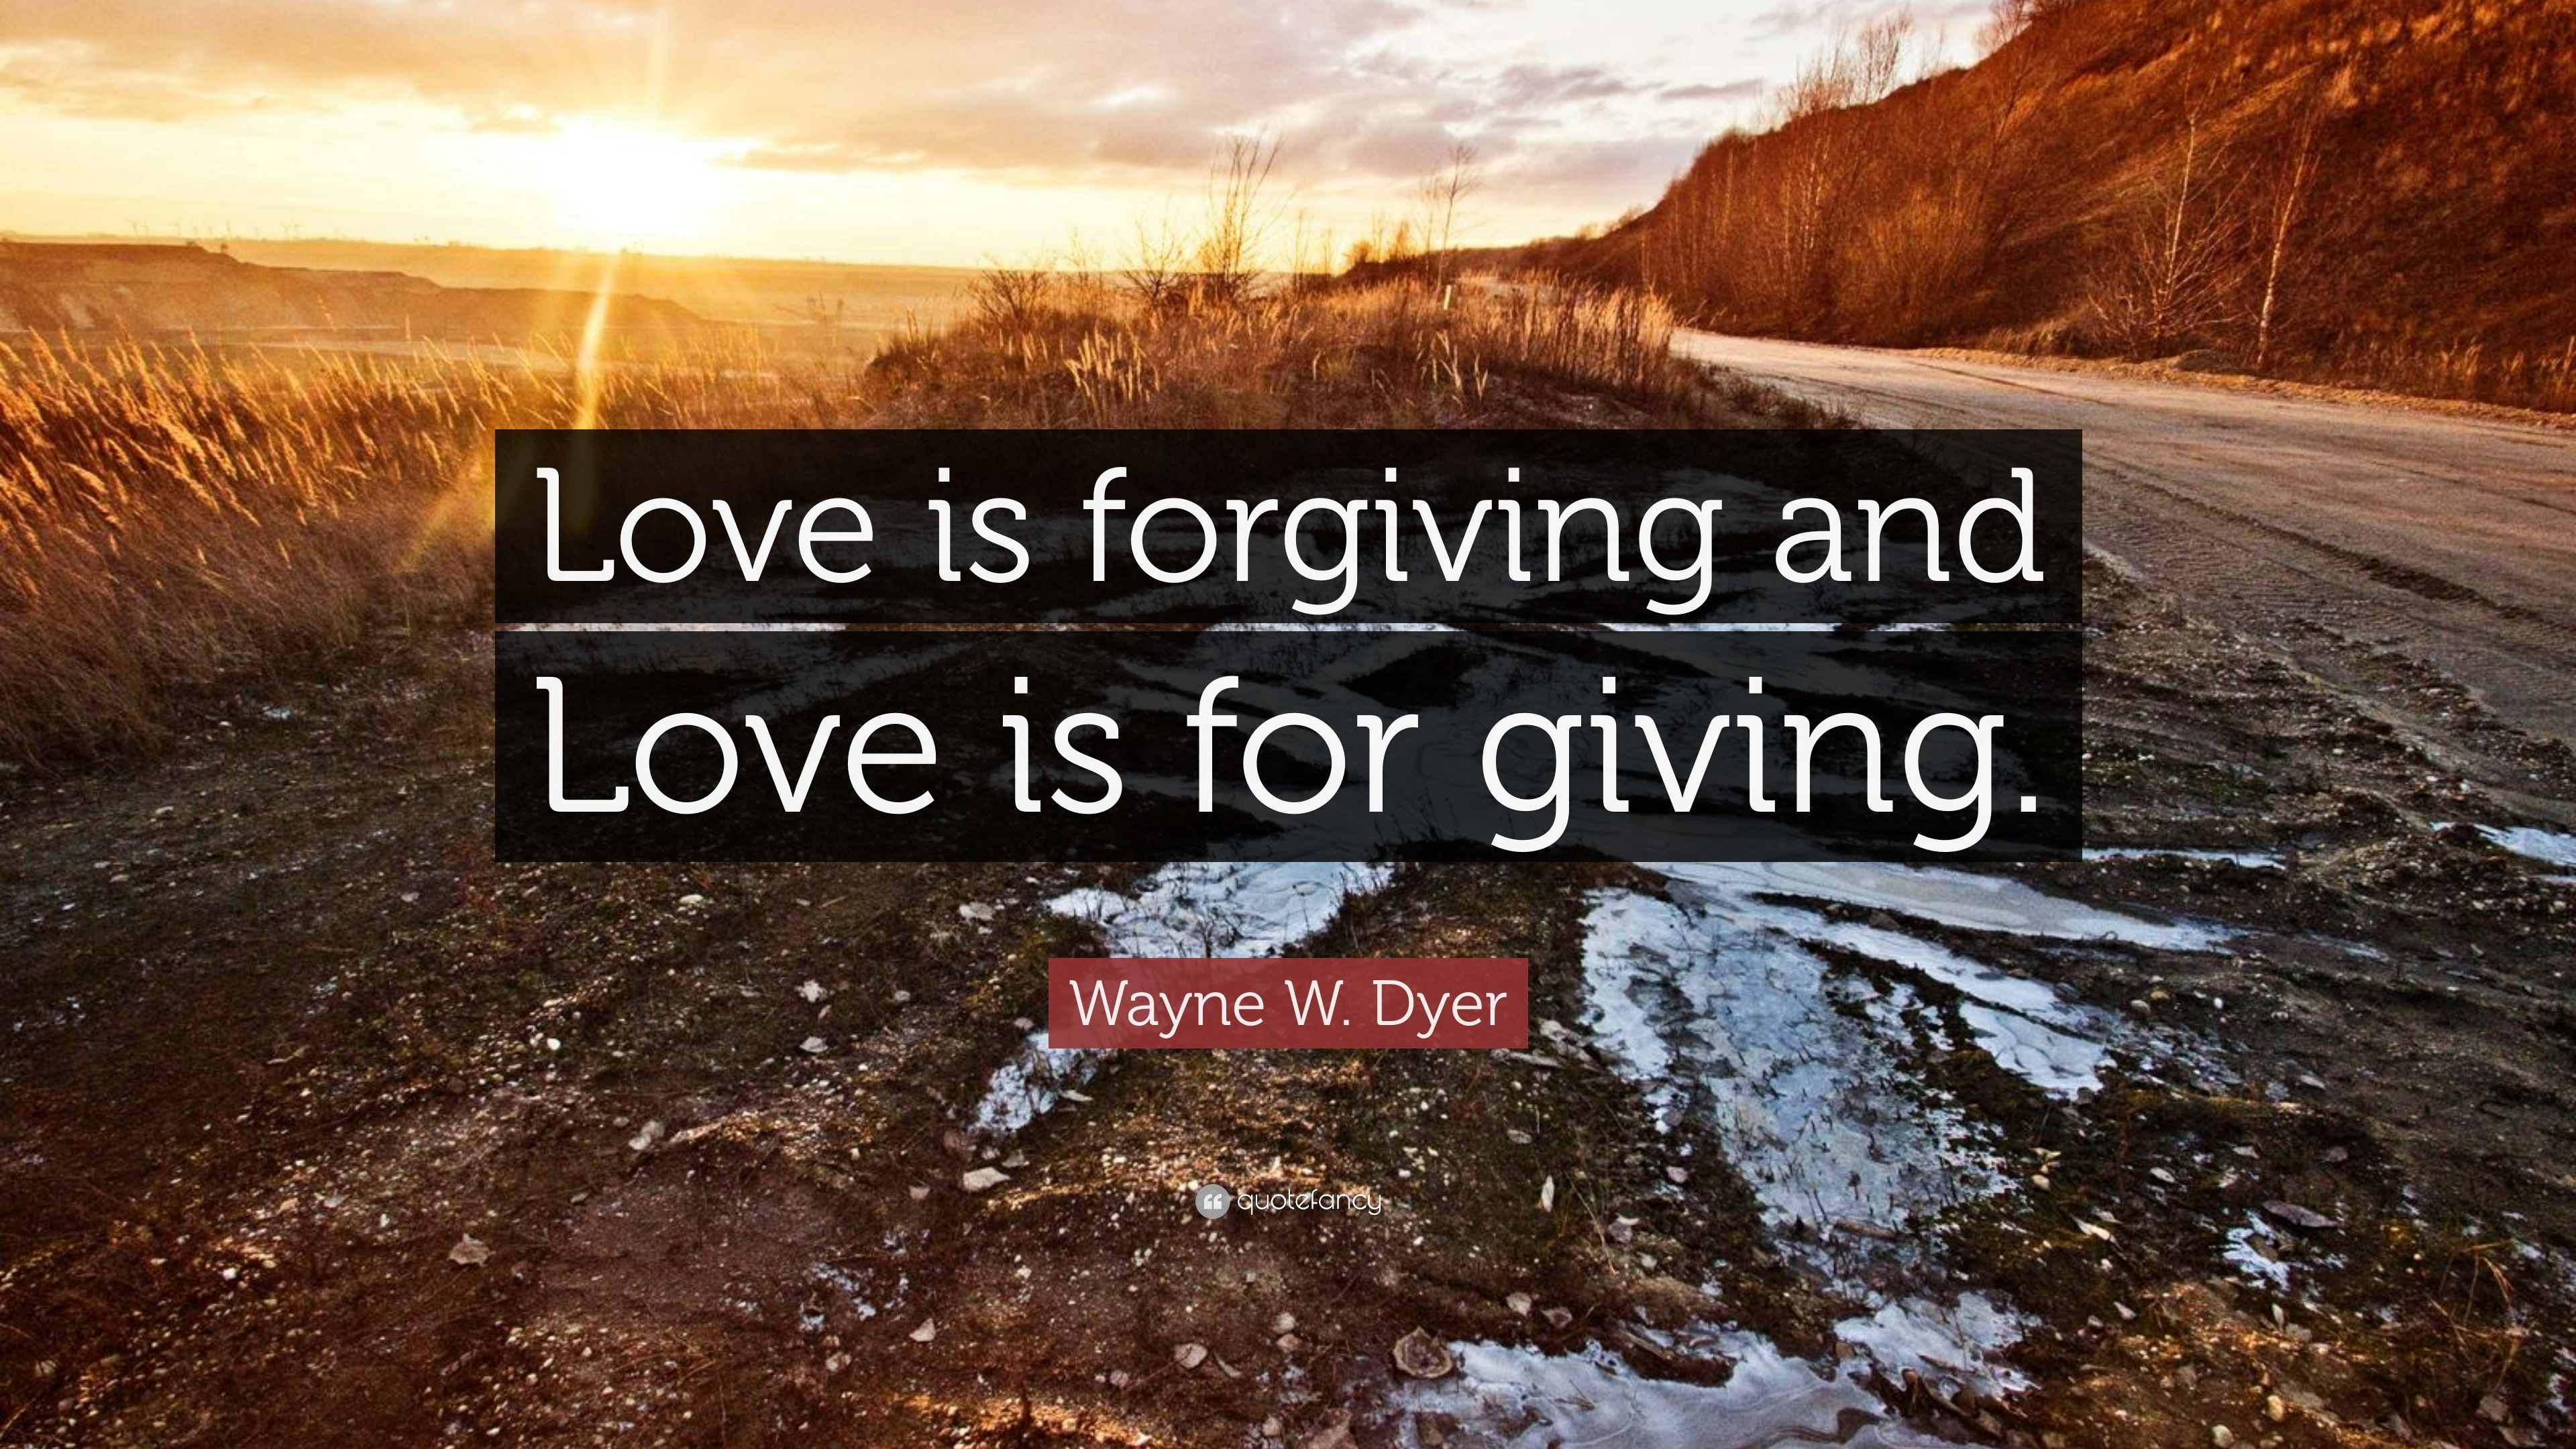 essay writing on love is giving and forgiving